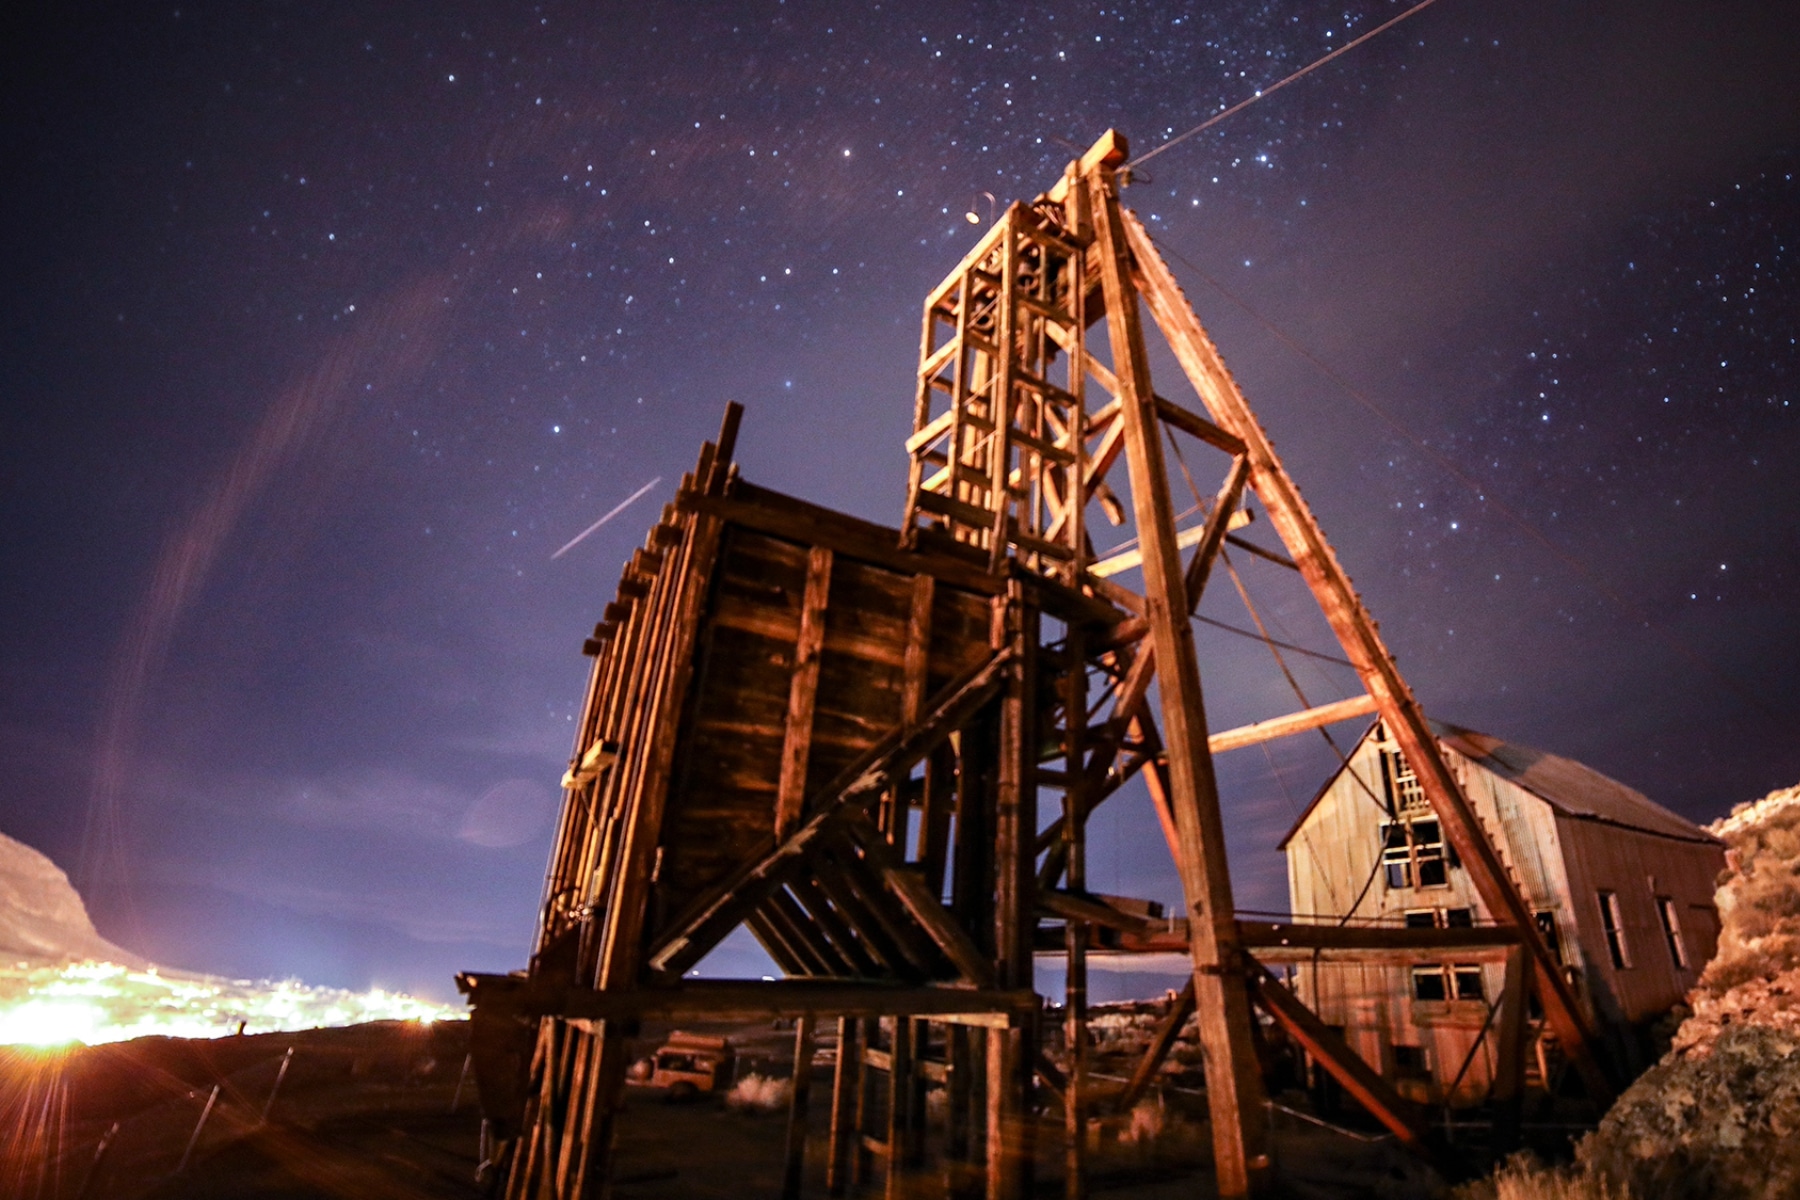 Tonopah Mining Park under starry skies, one of the stopping points of the dark sky park road trip